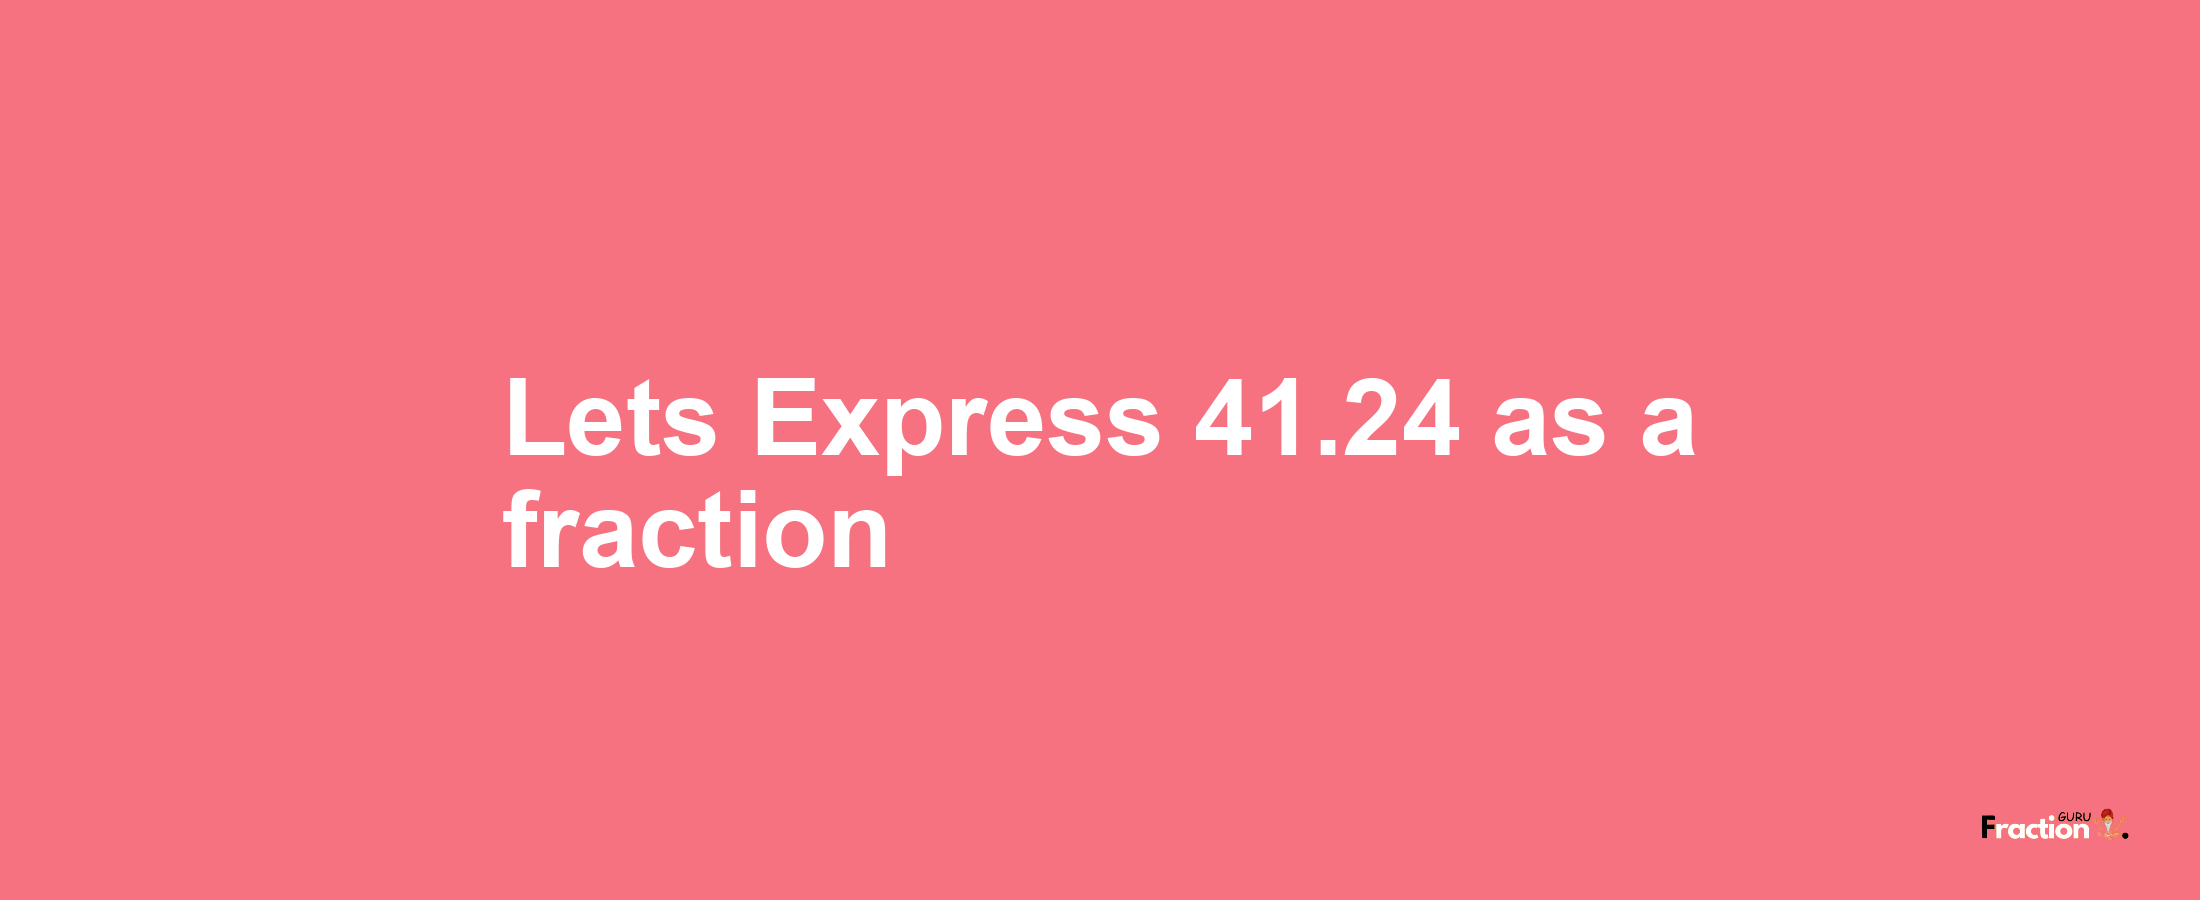 Lets Express 41.24 as afraction